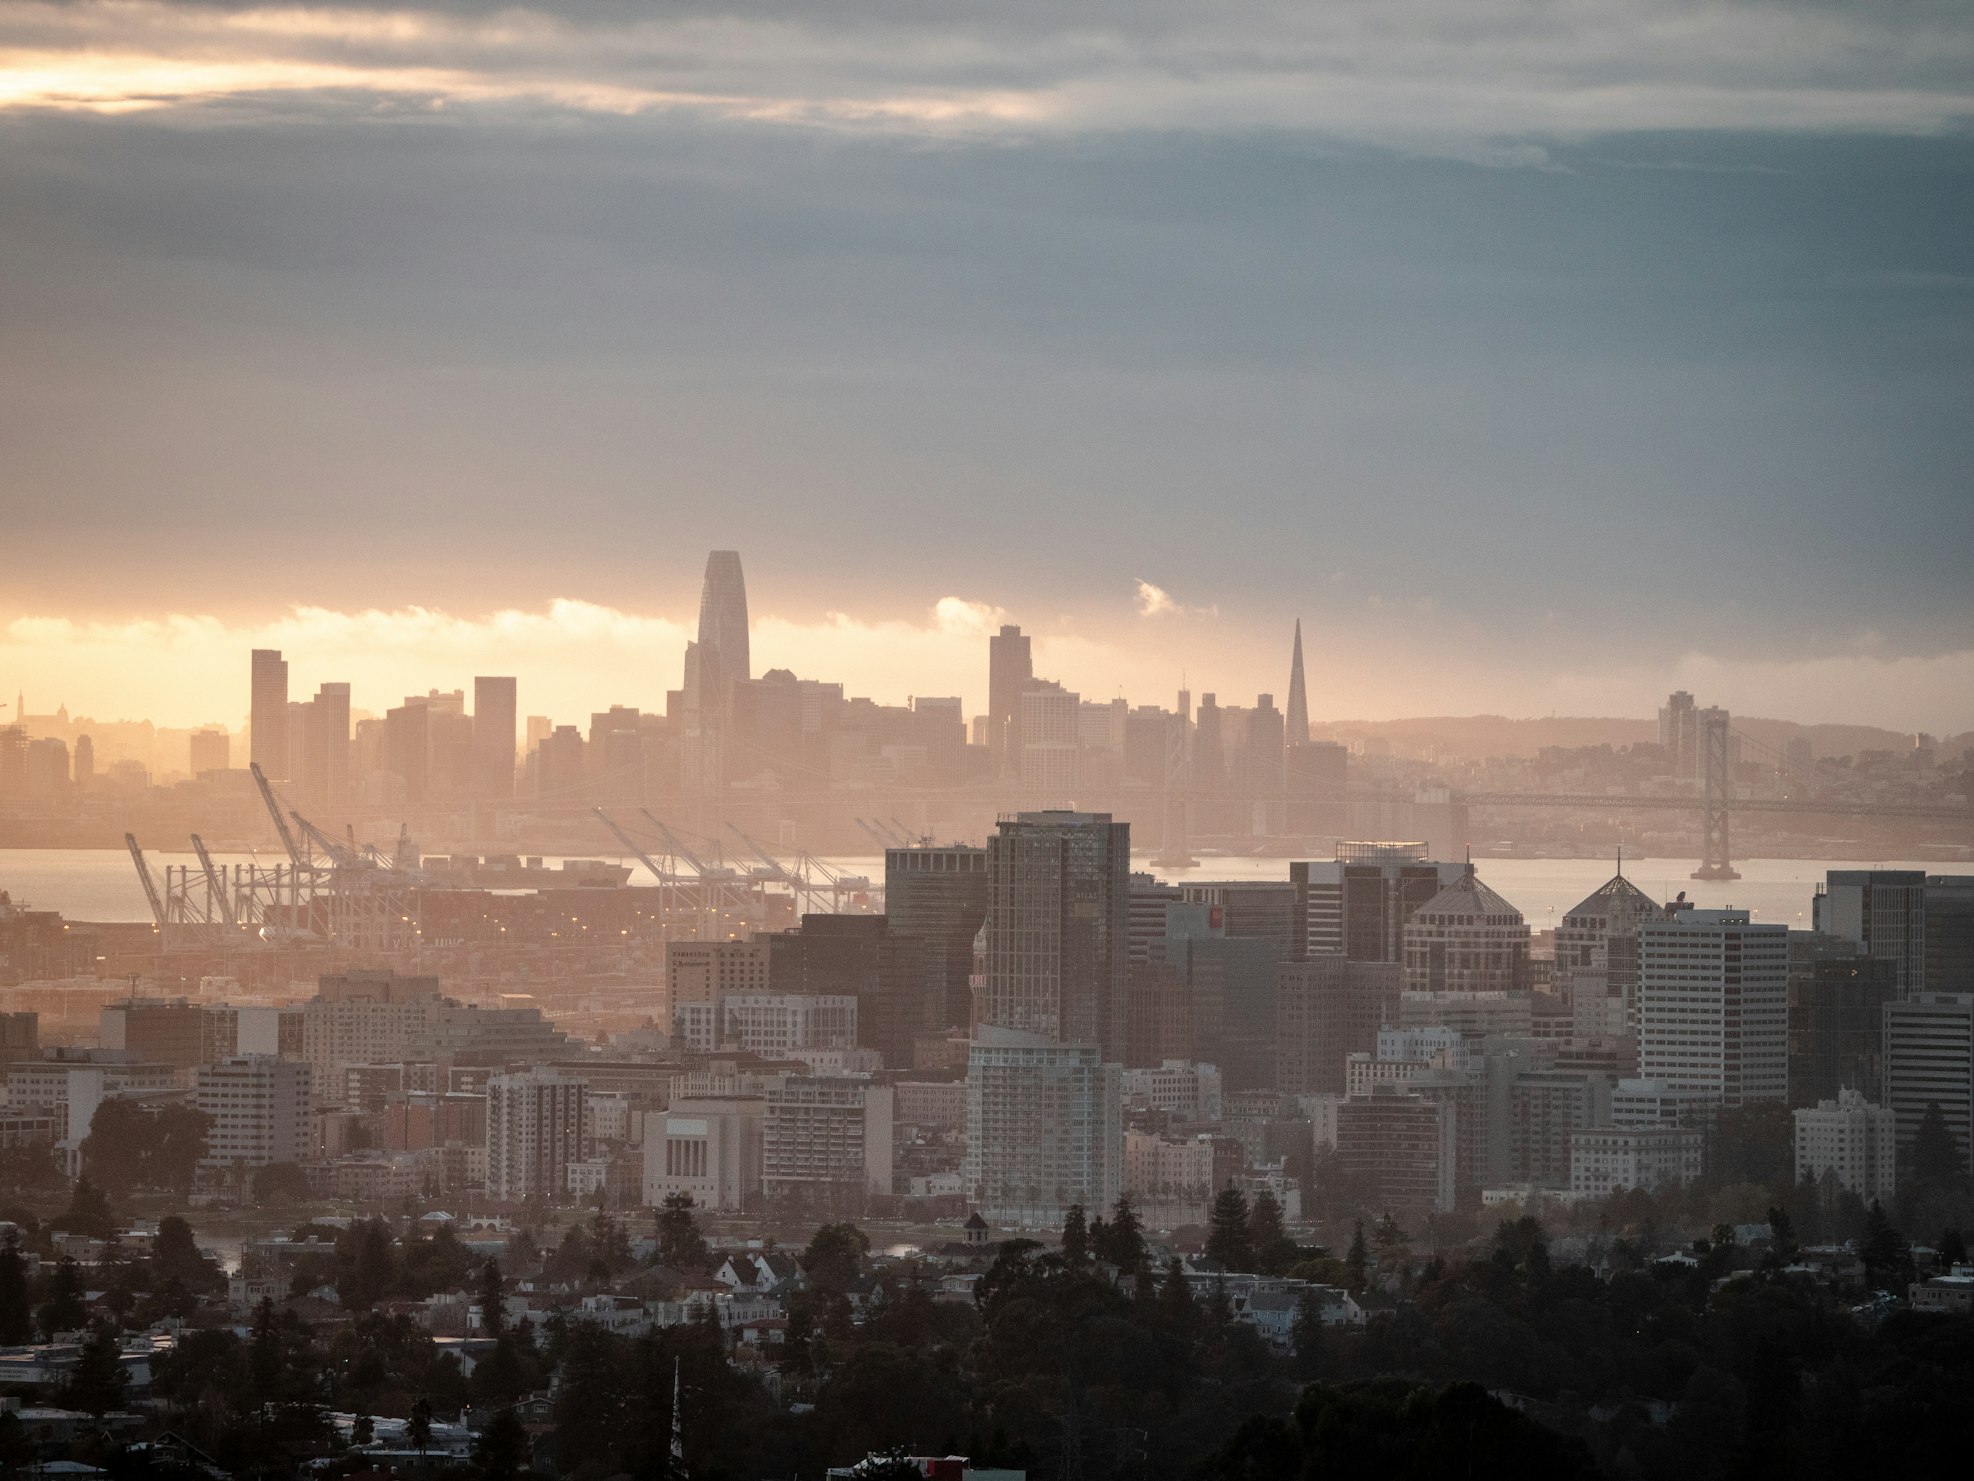 A view of the Oakland, California, Skyline